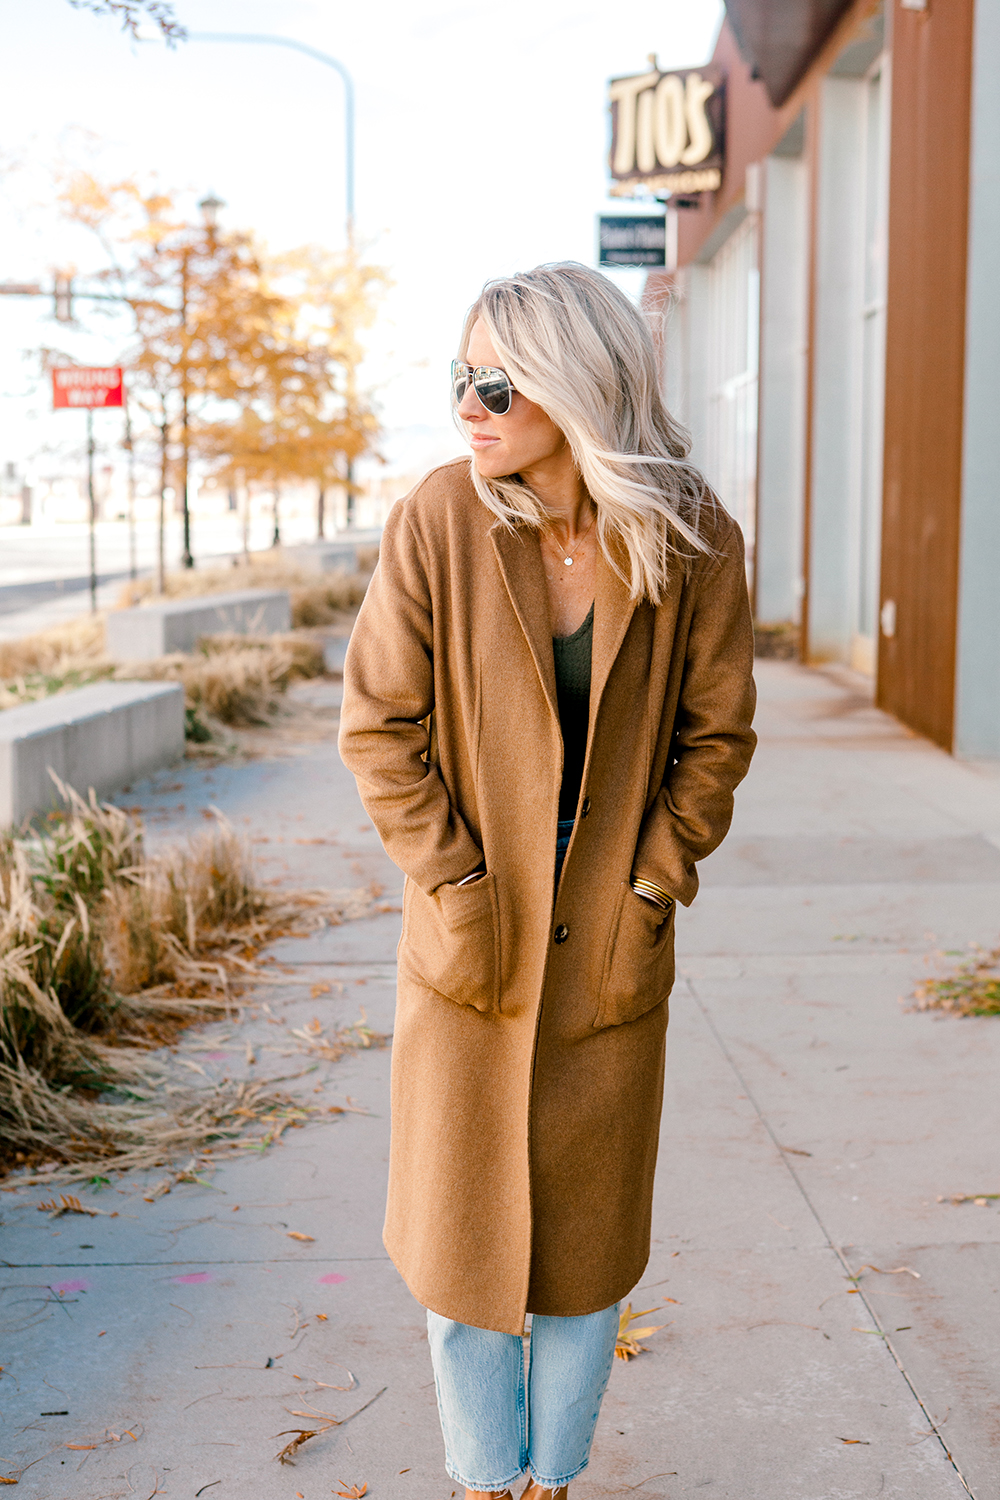 Kailee Wright tan over coat